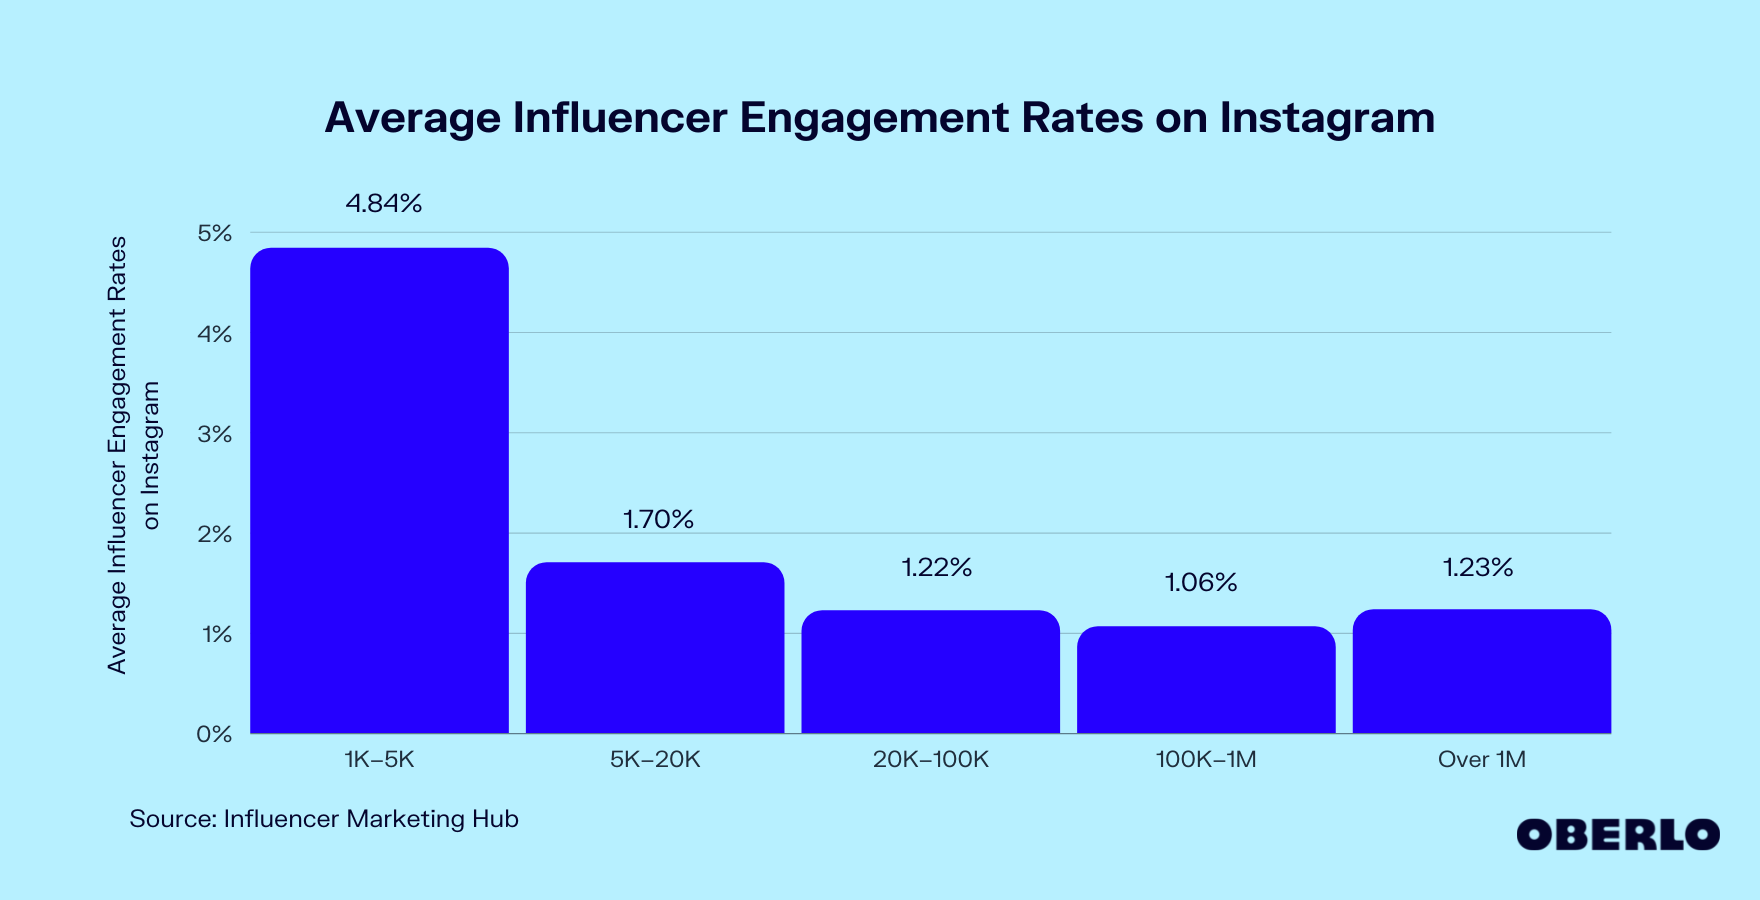 How to Find Influencer Engagement Rate?